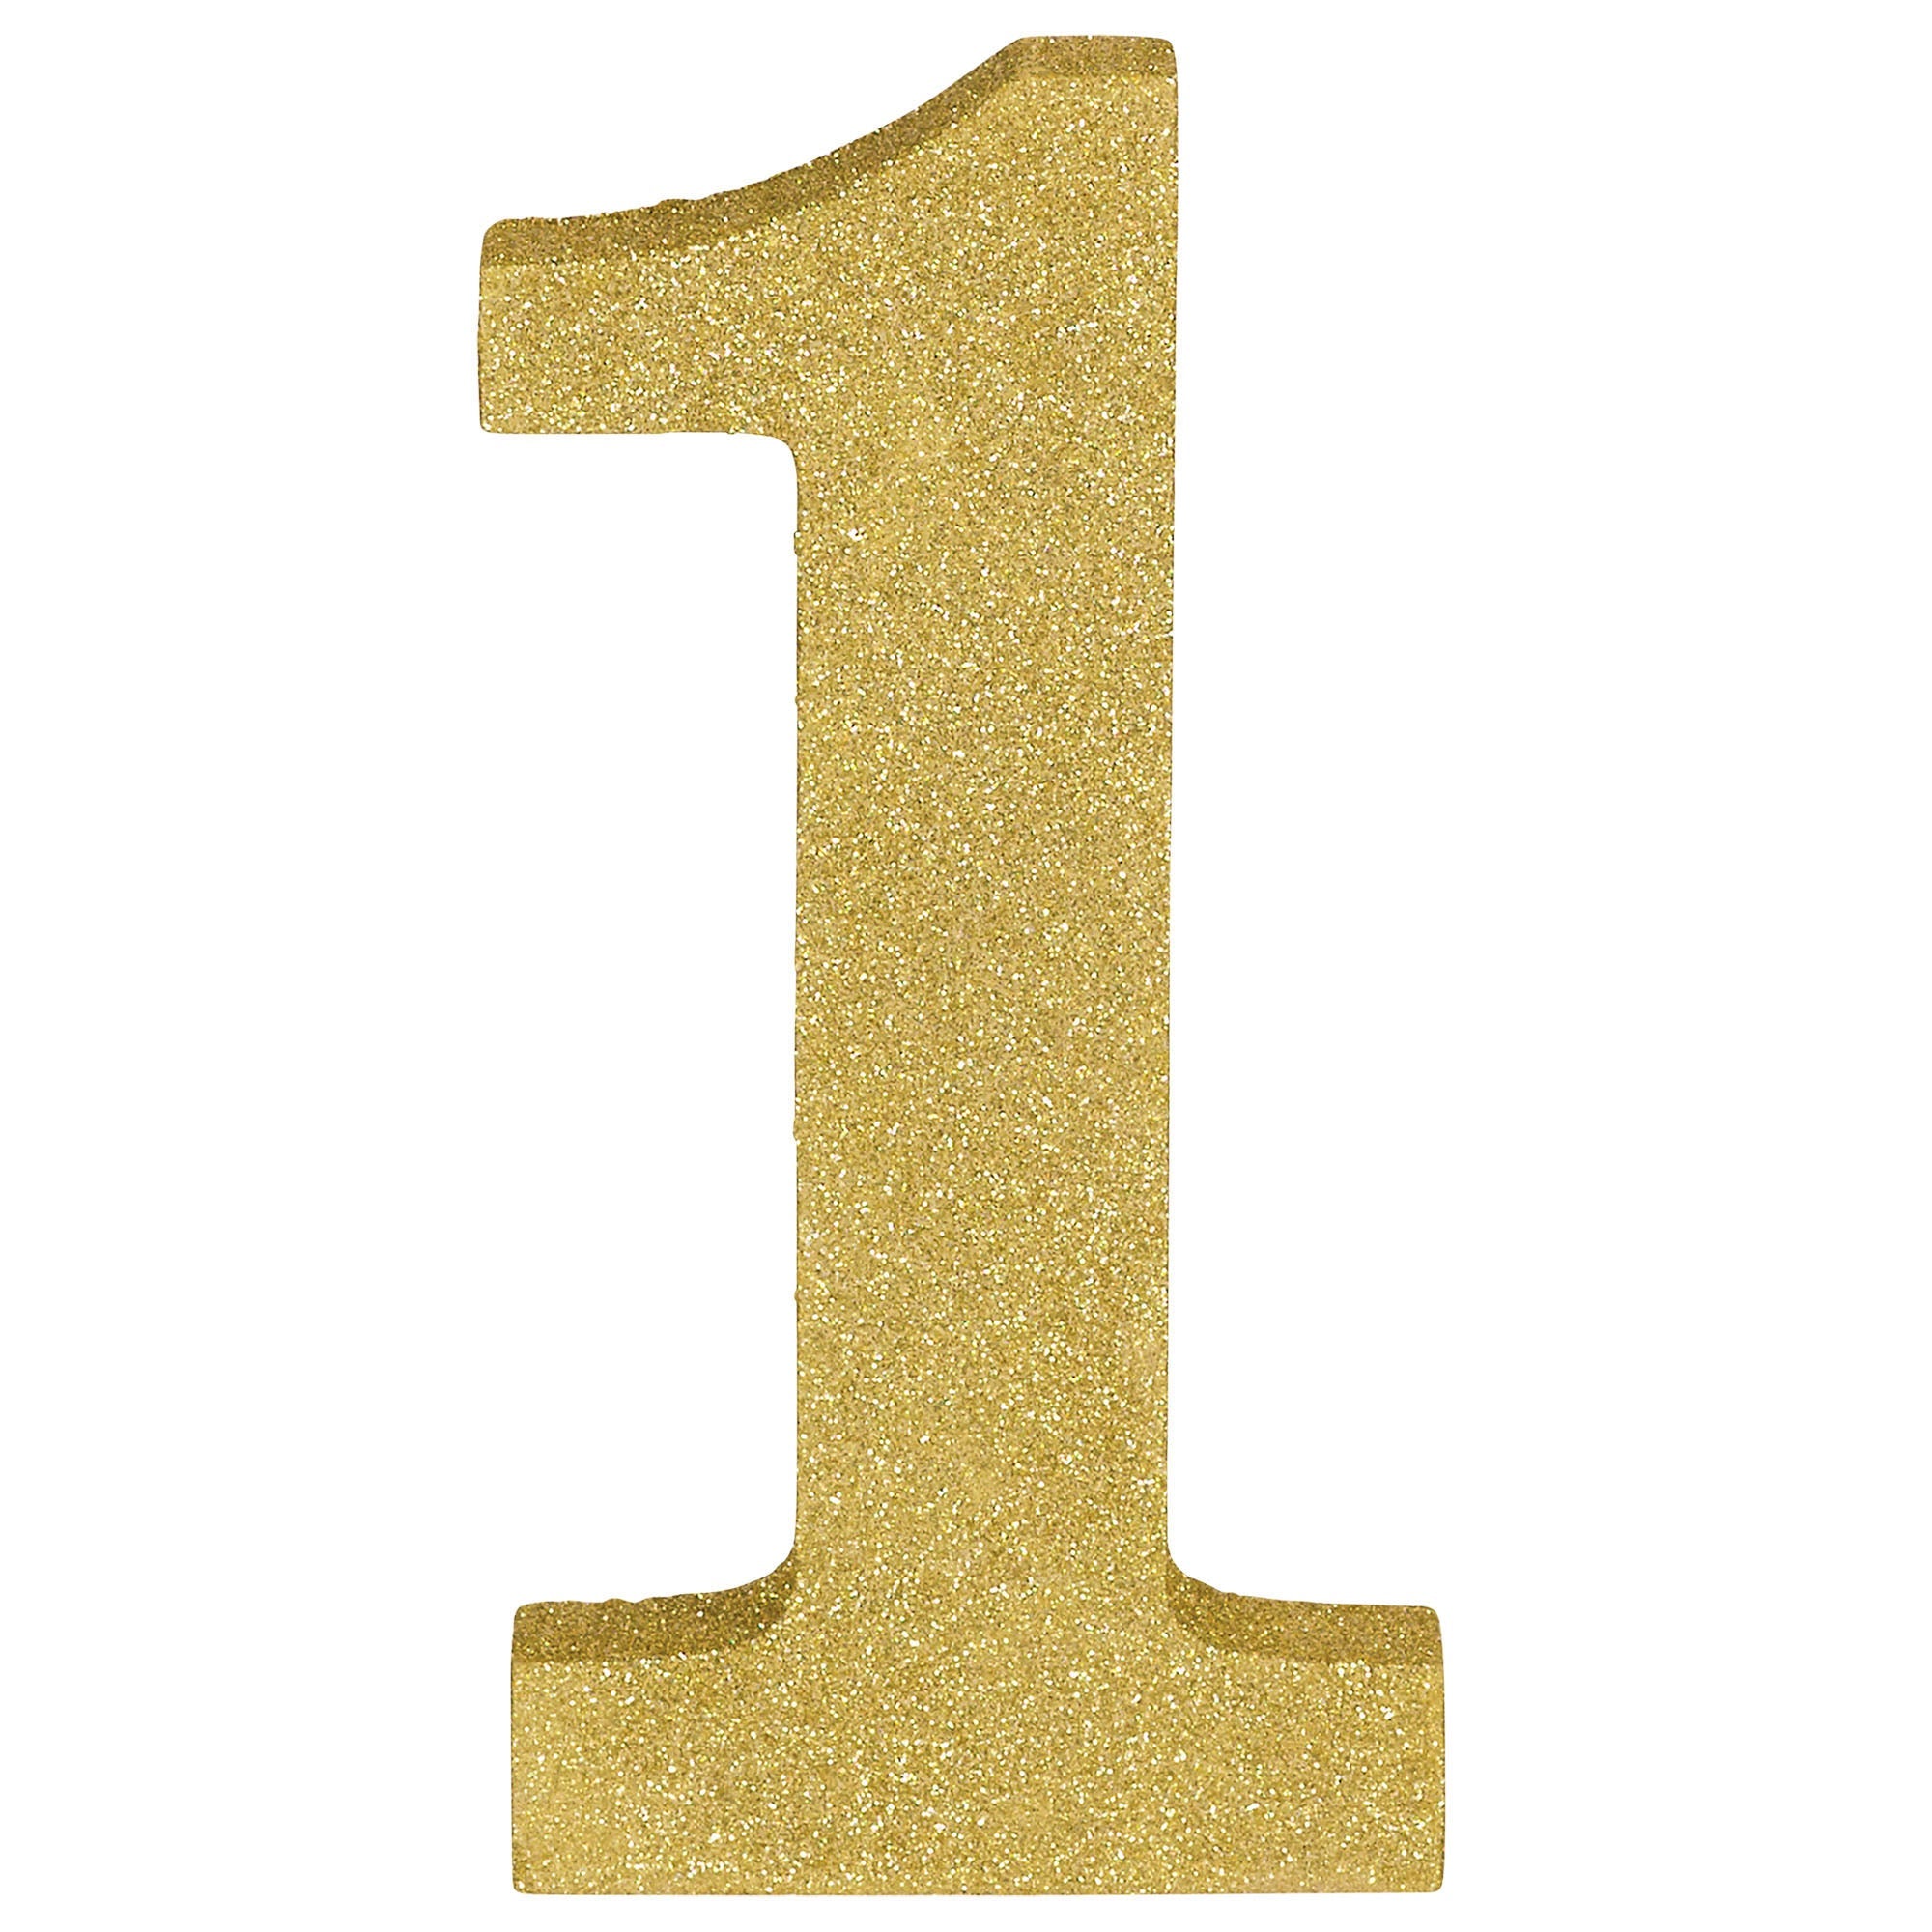 Number 1 Glitter MDF Decoration  Gold  8.875x4.5x1in